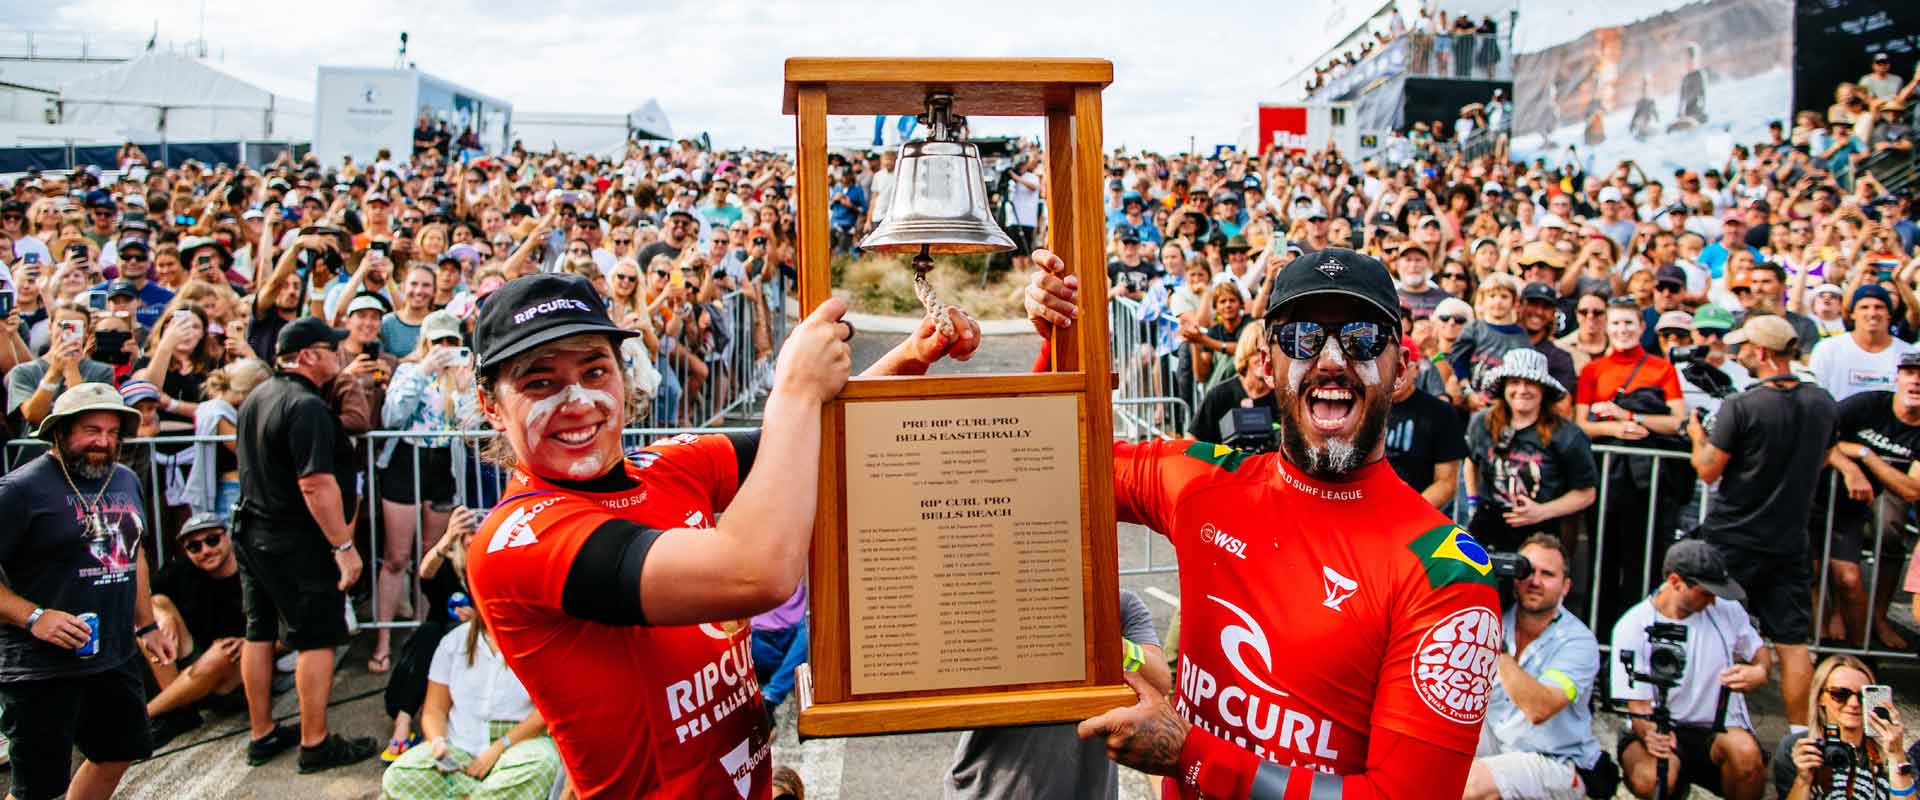 Bells beach winners hold the bell up in front of a cheering crowd